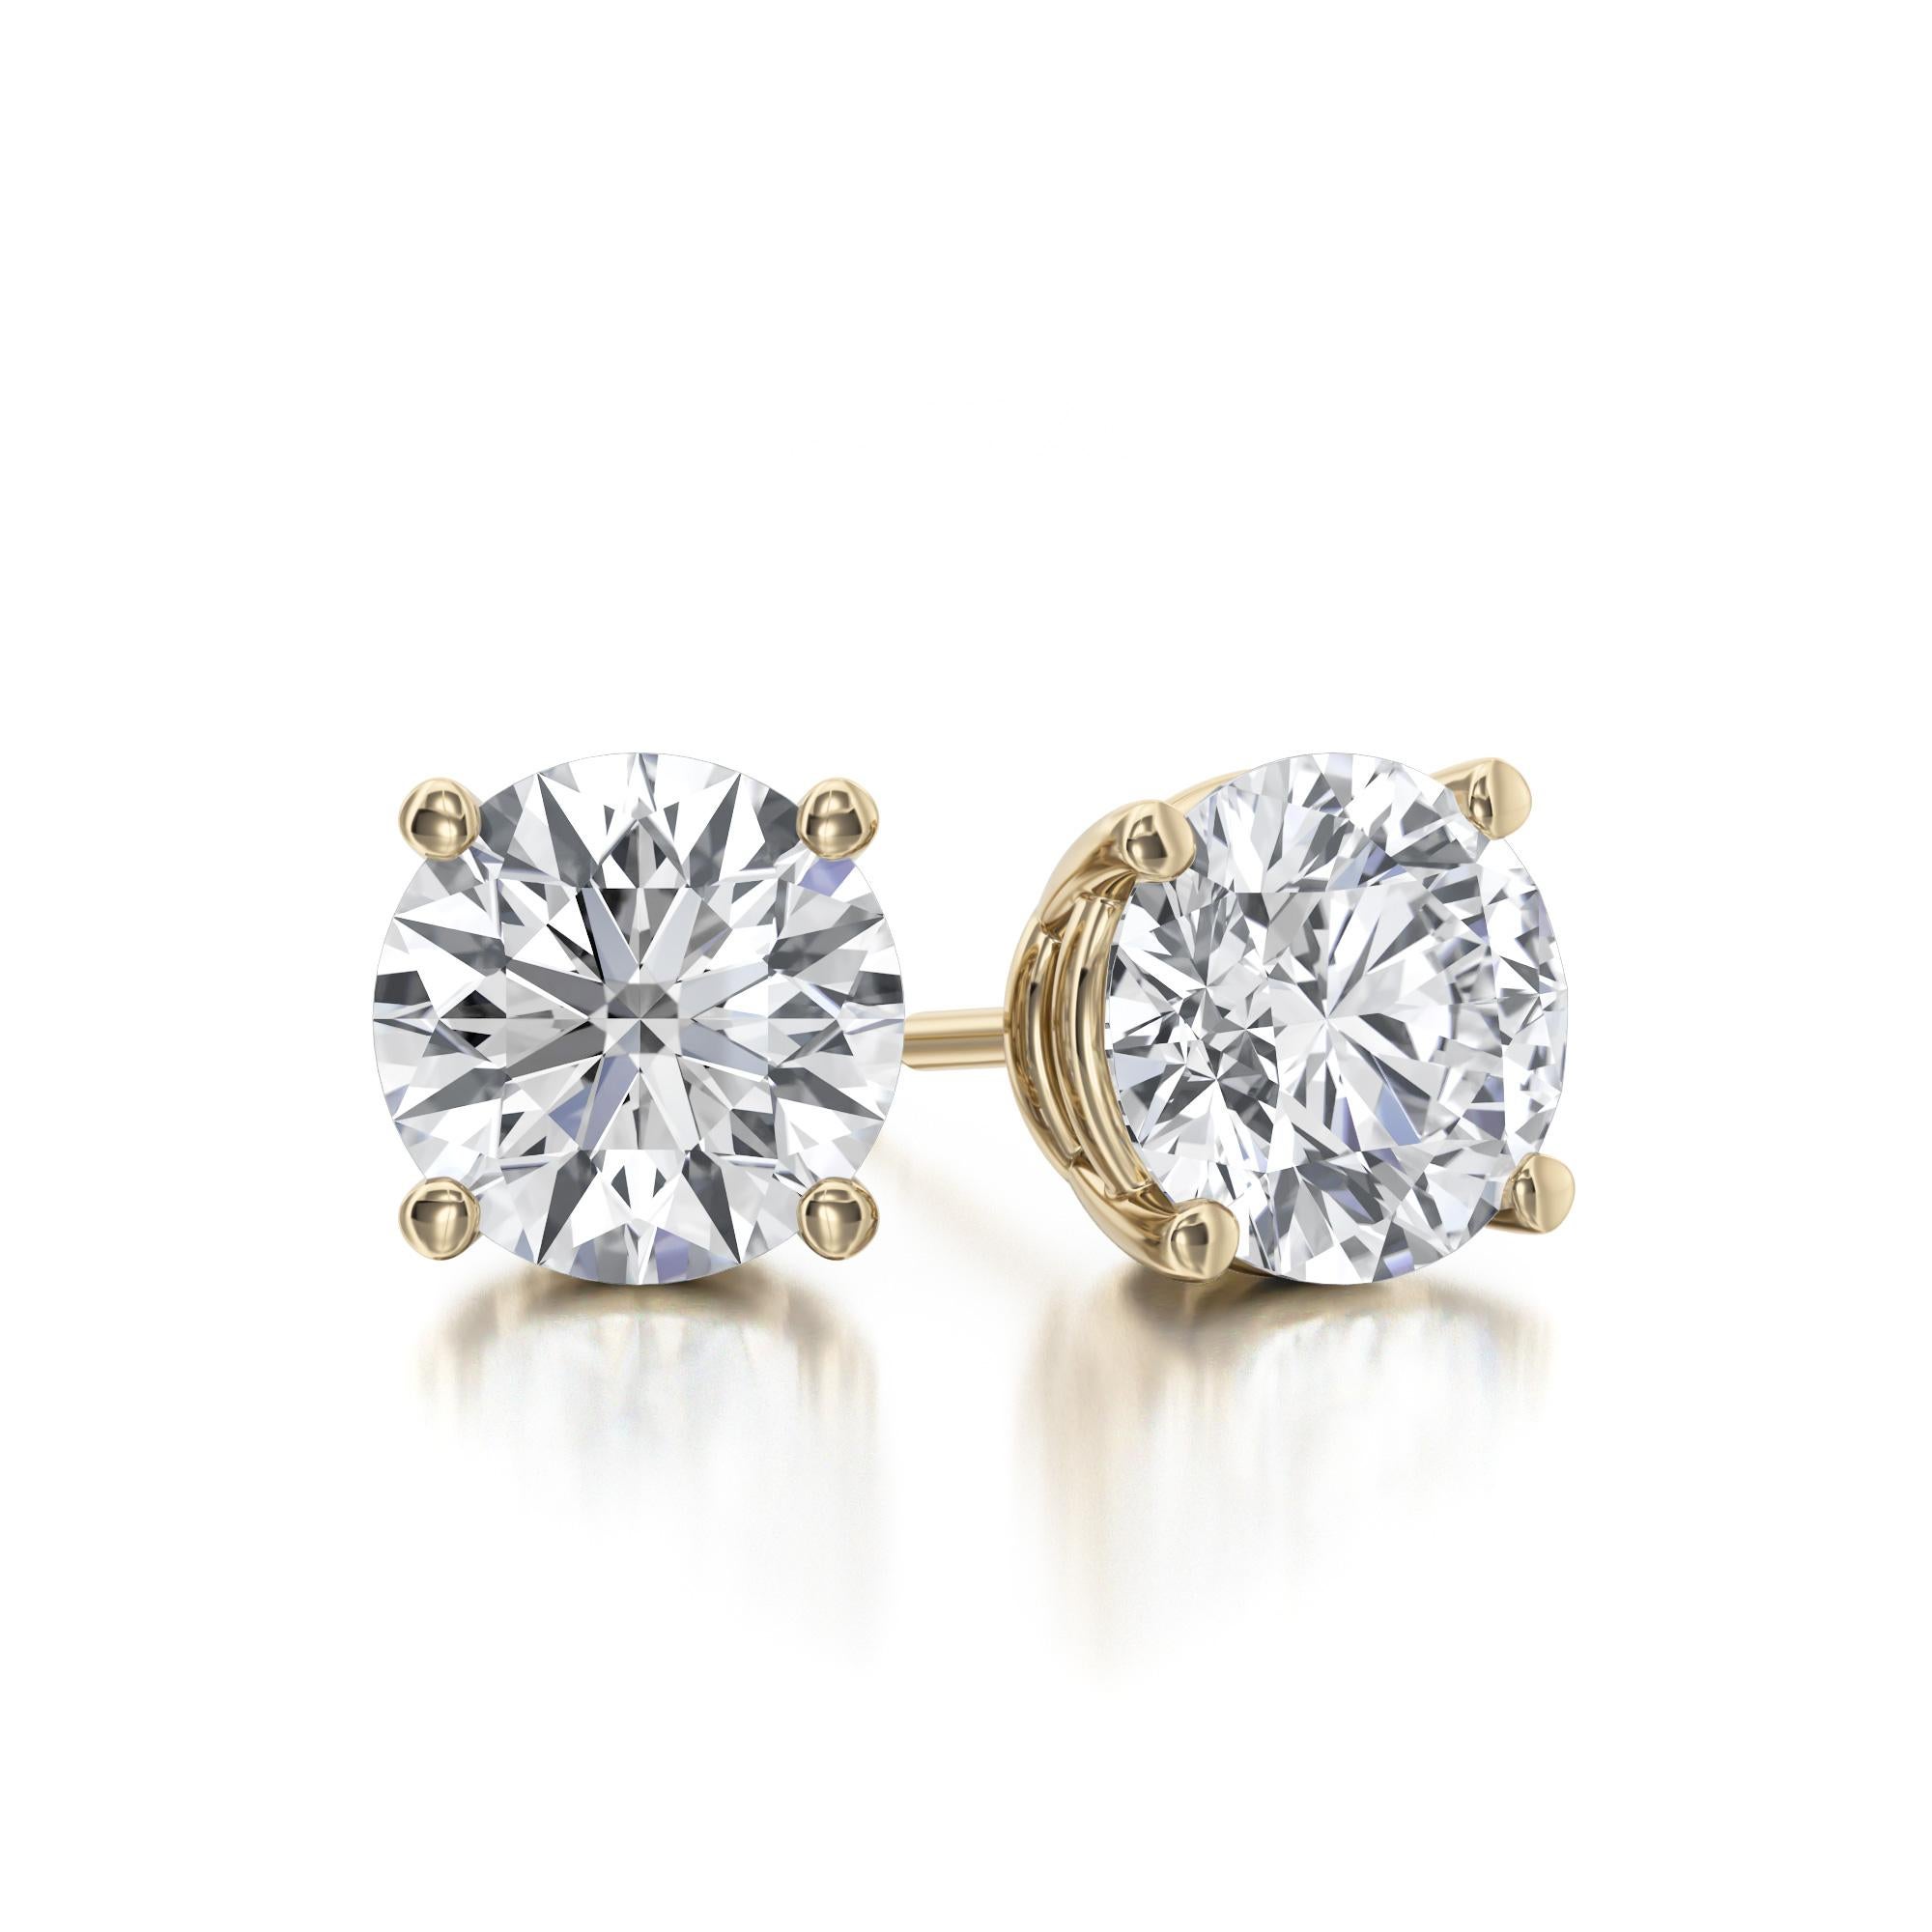 Classic Four Prong Diamond Stud Earrings, featuring:
✧ 2 lab-grown diamonds G-H color VS1-VS2 weighing 1.00 carat+
✧ Measurements: 5.00mm*5.00mm
✧ Available in 14K Yellow Gold
✧ Push back friction closure
✧ Free appraisal included with your